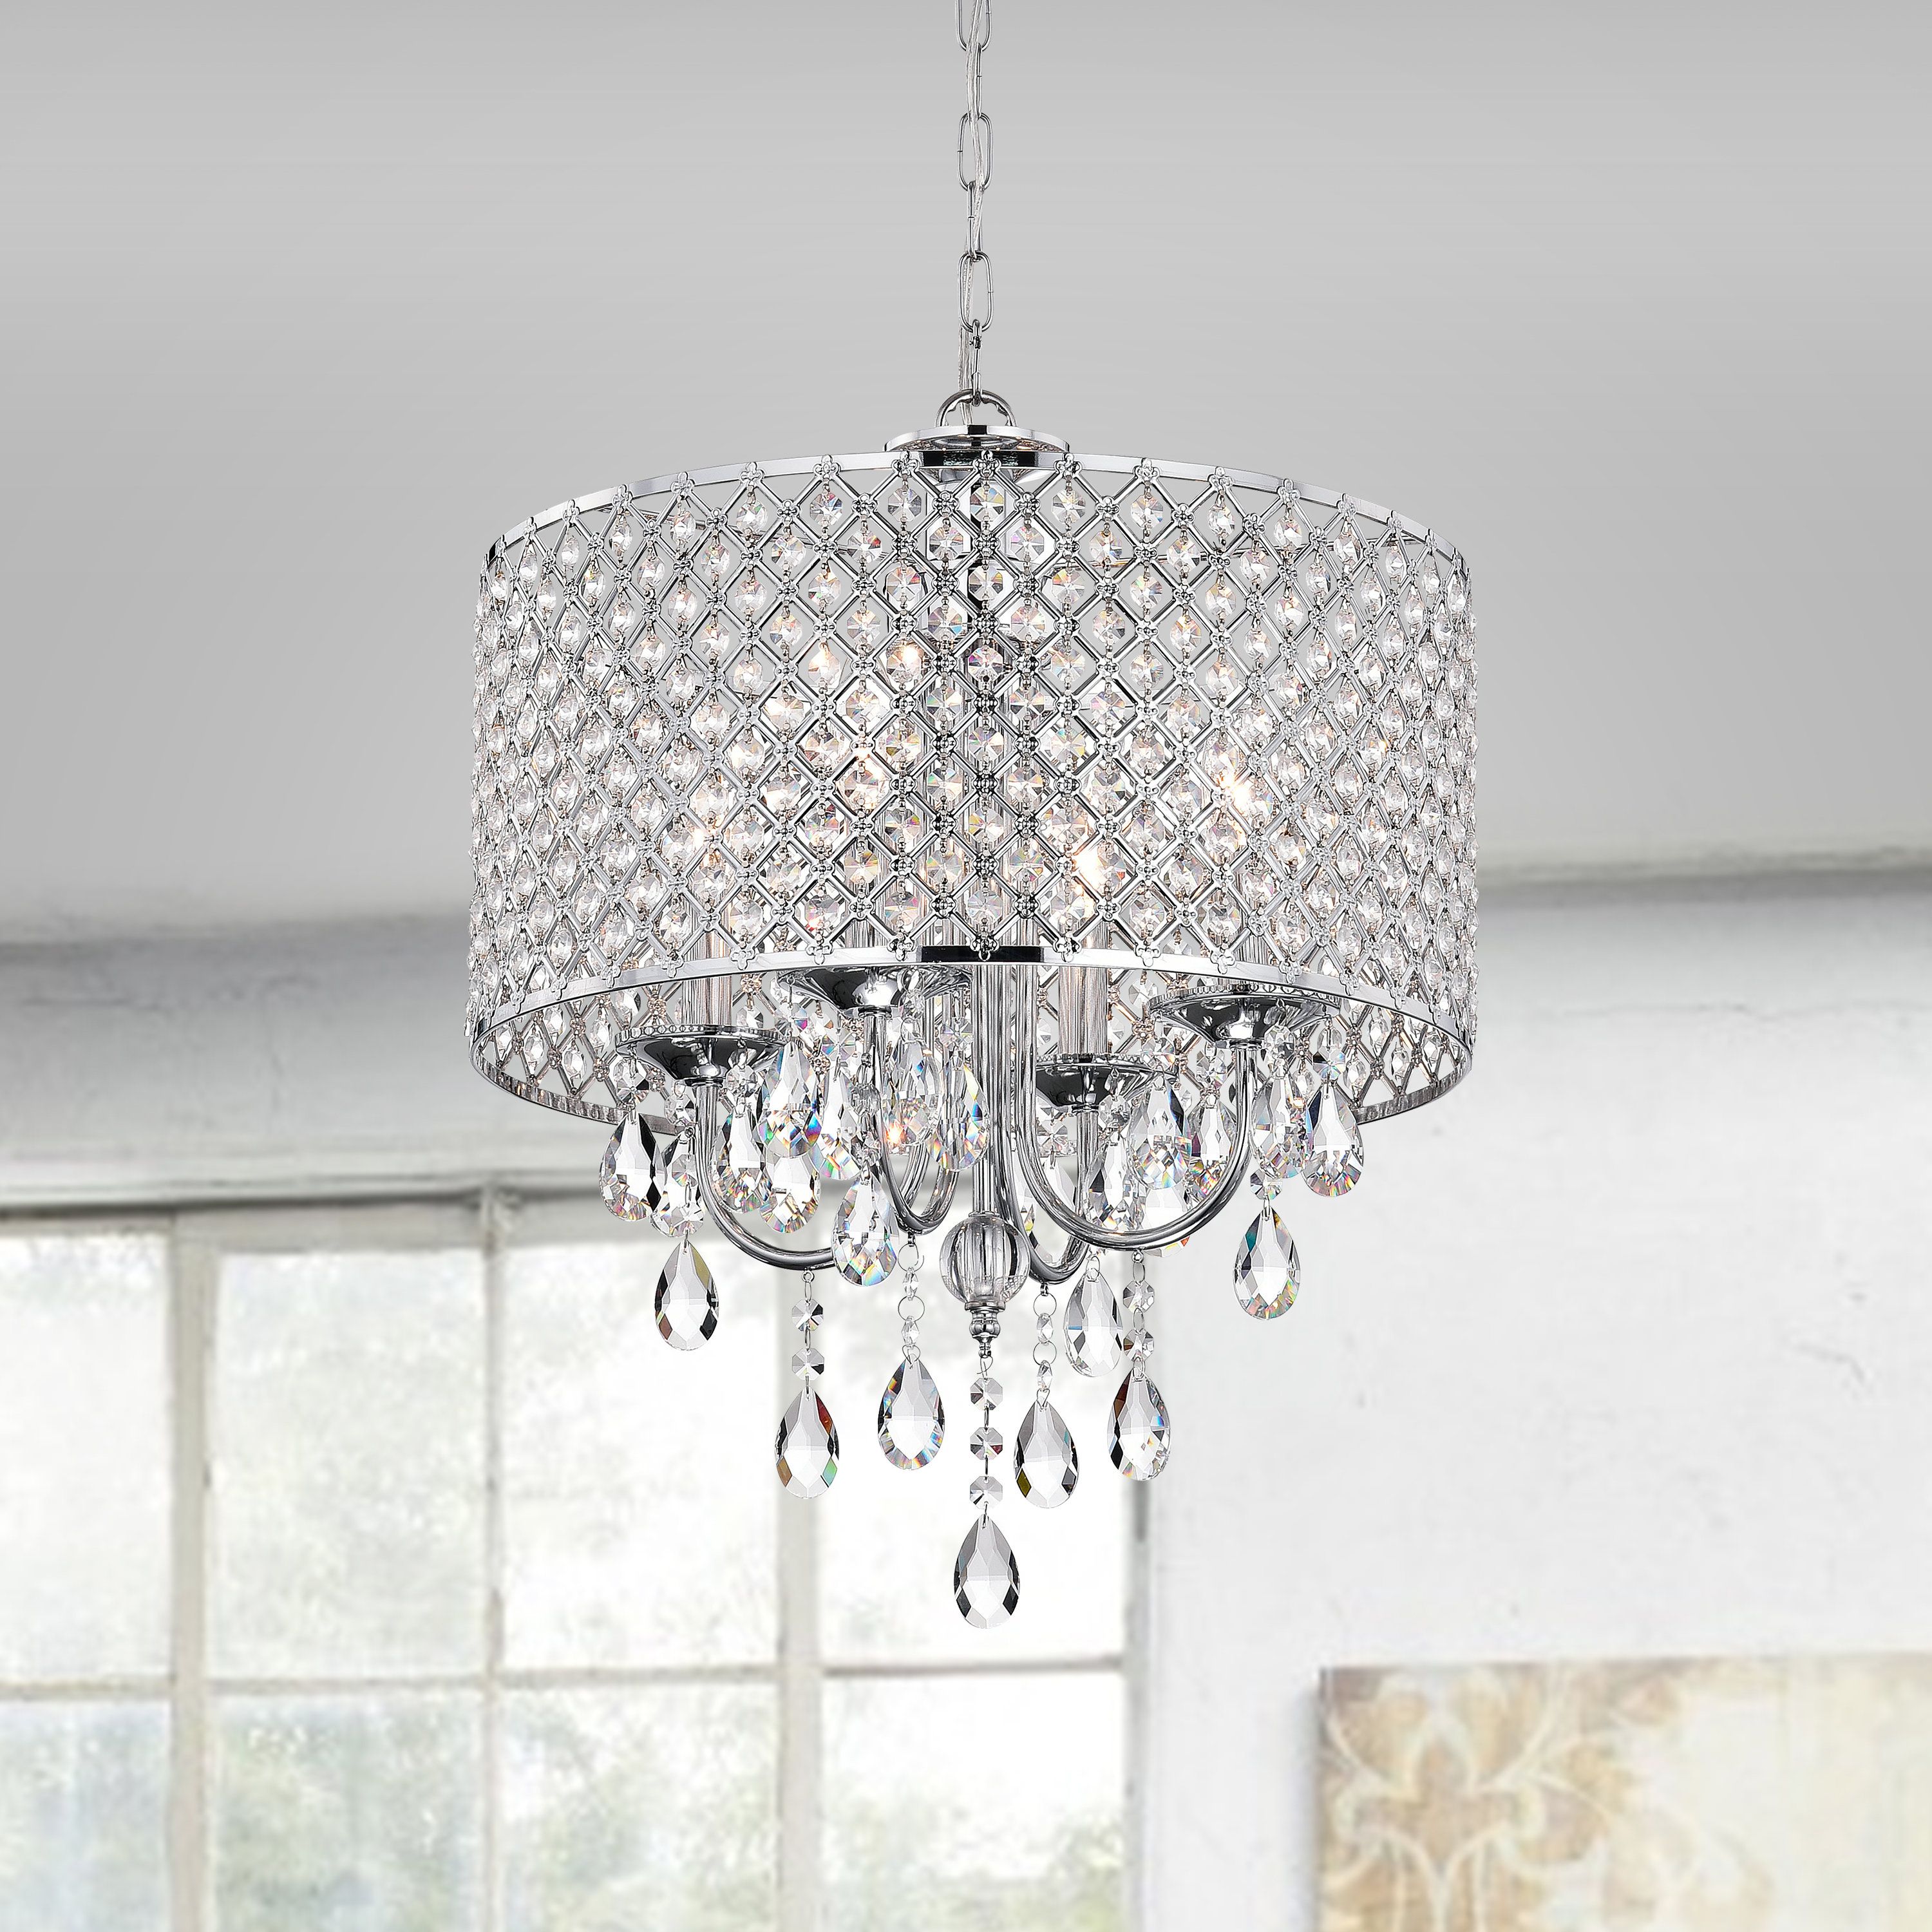 Best And Newest Aldgate 4 Light Crystal Chandelier Regarding Aldgate 4 Light Crystal Chandeliers (View 1 of 20)